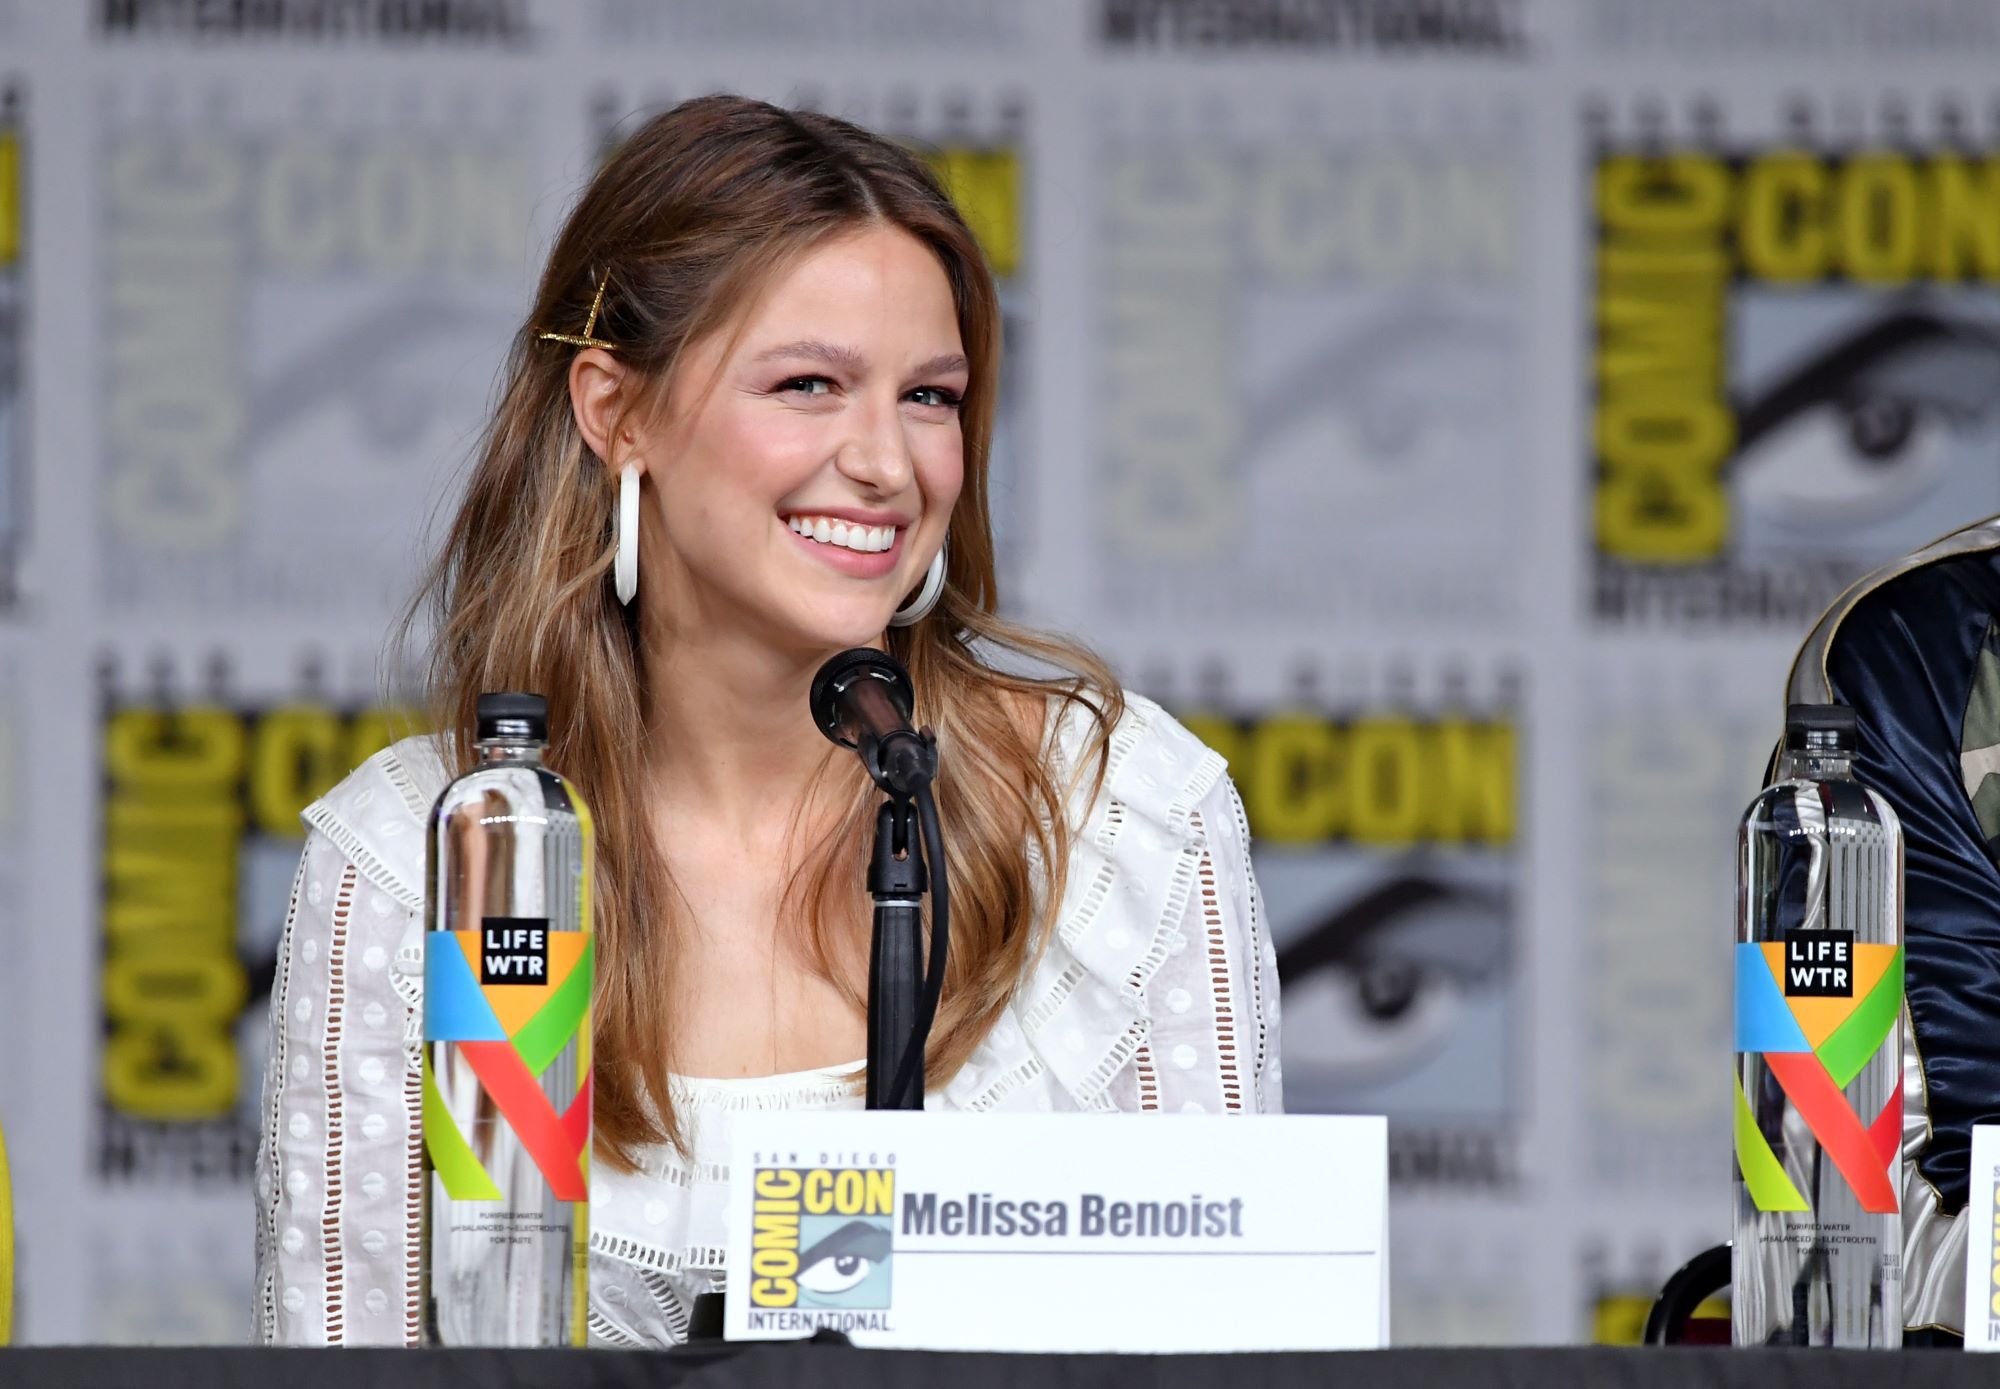 'Supergirl' Season 6 Episode 13 star Melissa Benoist wear a long sleeved white blouse and speaks onstage at Comic-Con.